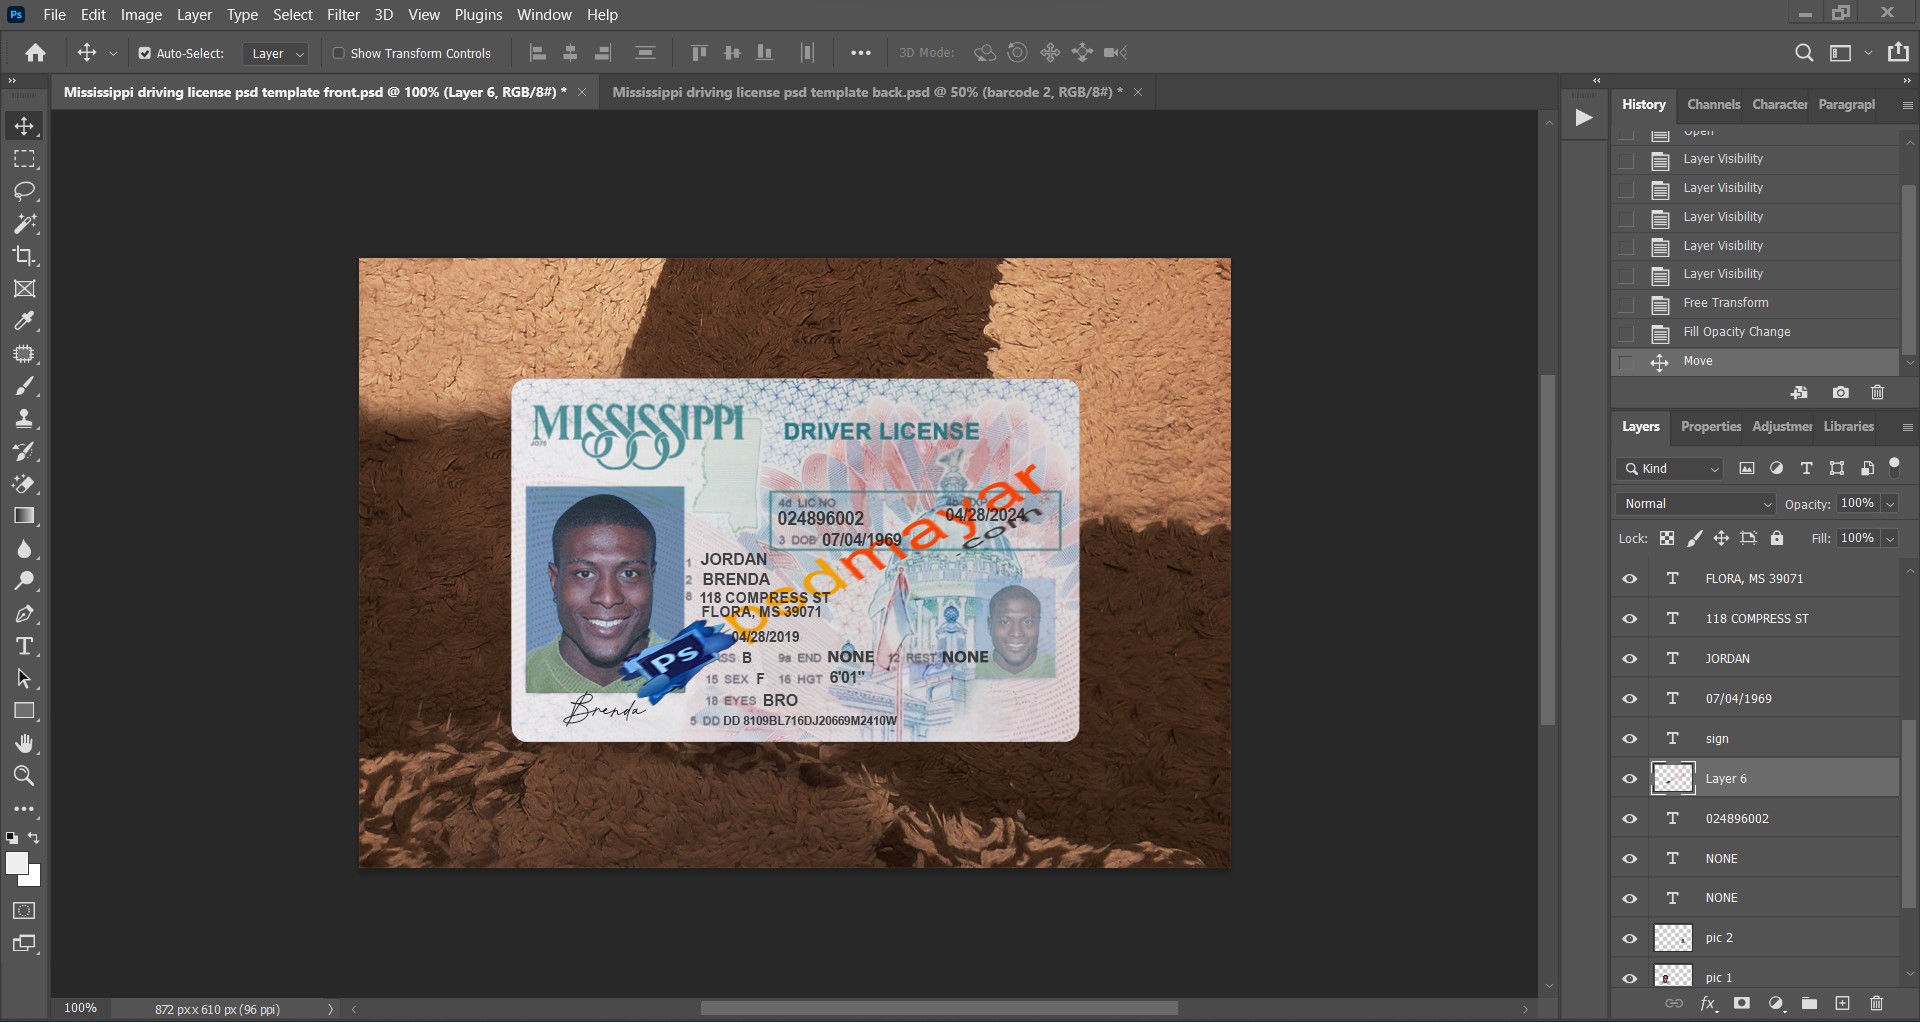 Mississippi driving license psd template